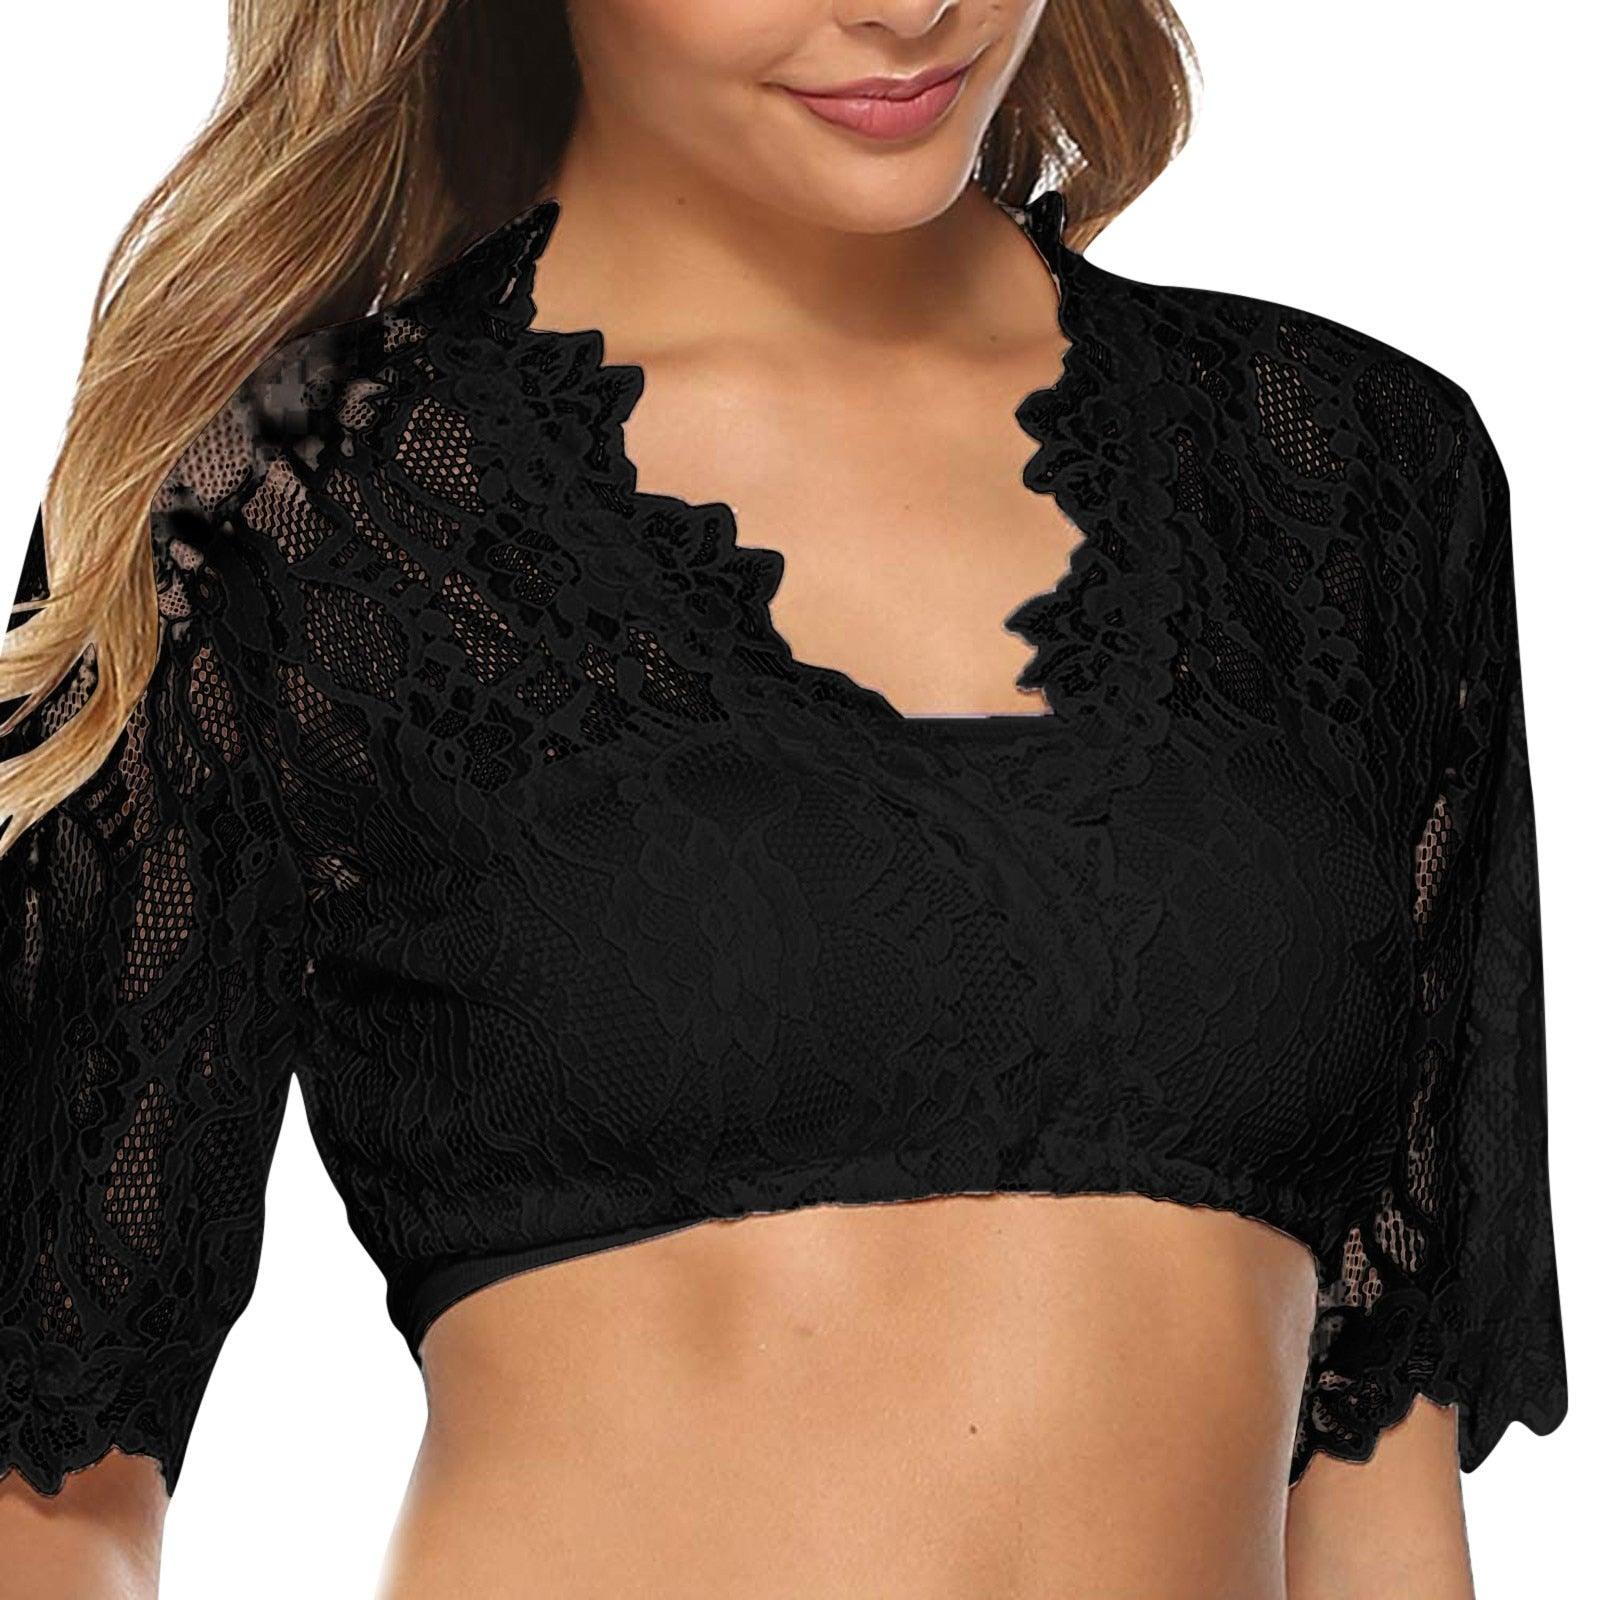 Women's Shirts - Cropped Tops Black Lace Dirndl Top Womens Satin Lingerie